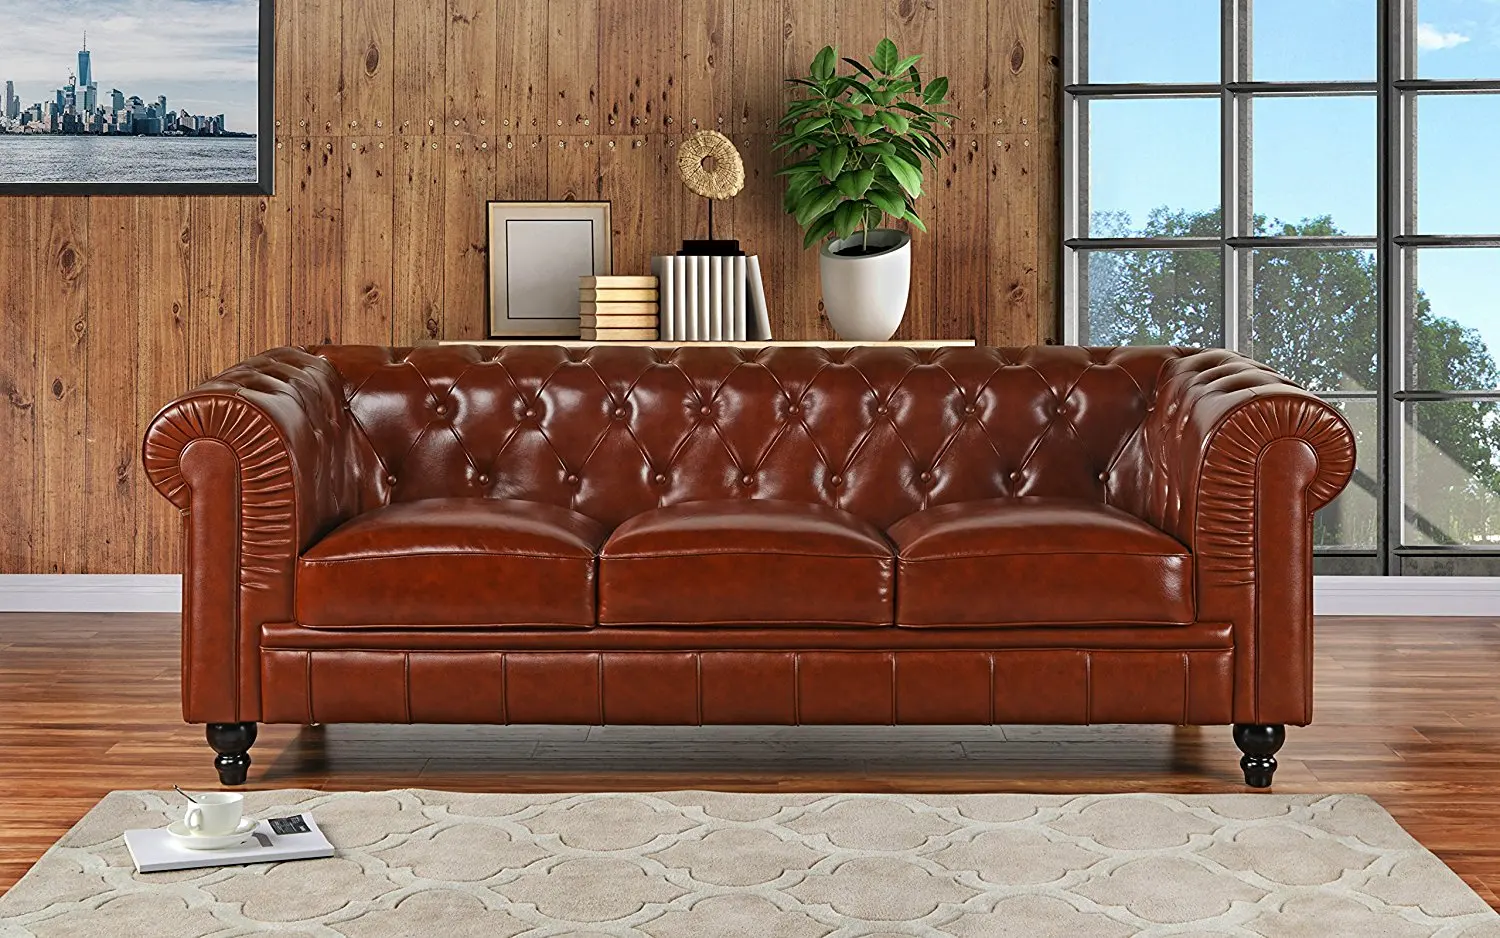 Cheap Chesterfield Sofa, find Chesterfield Sofa deals on